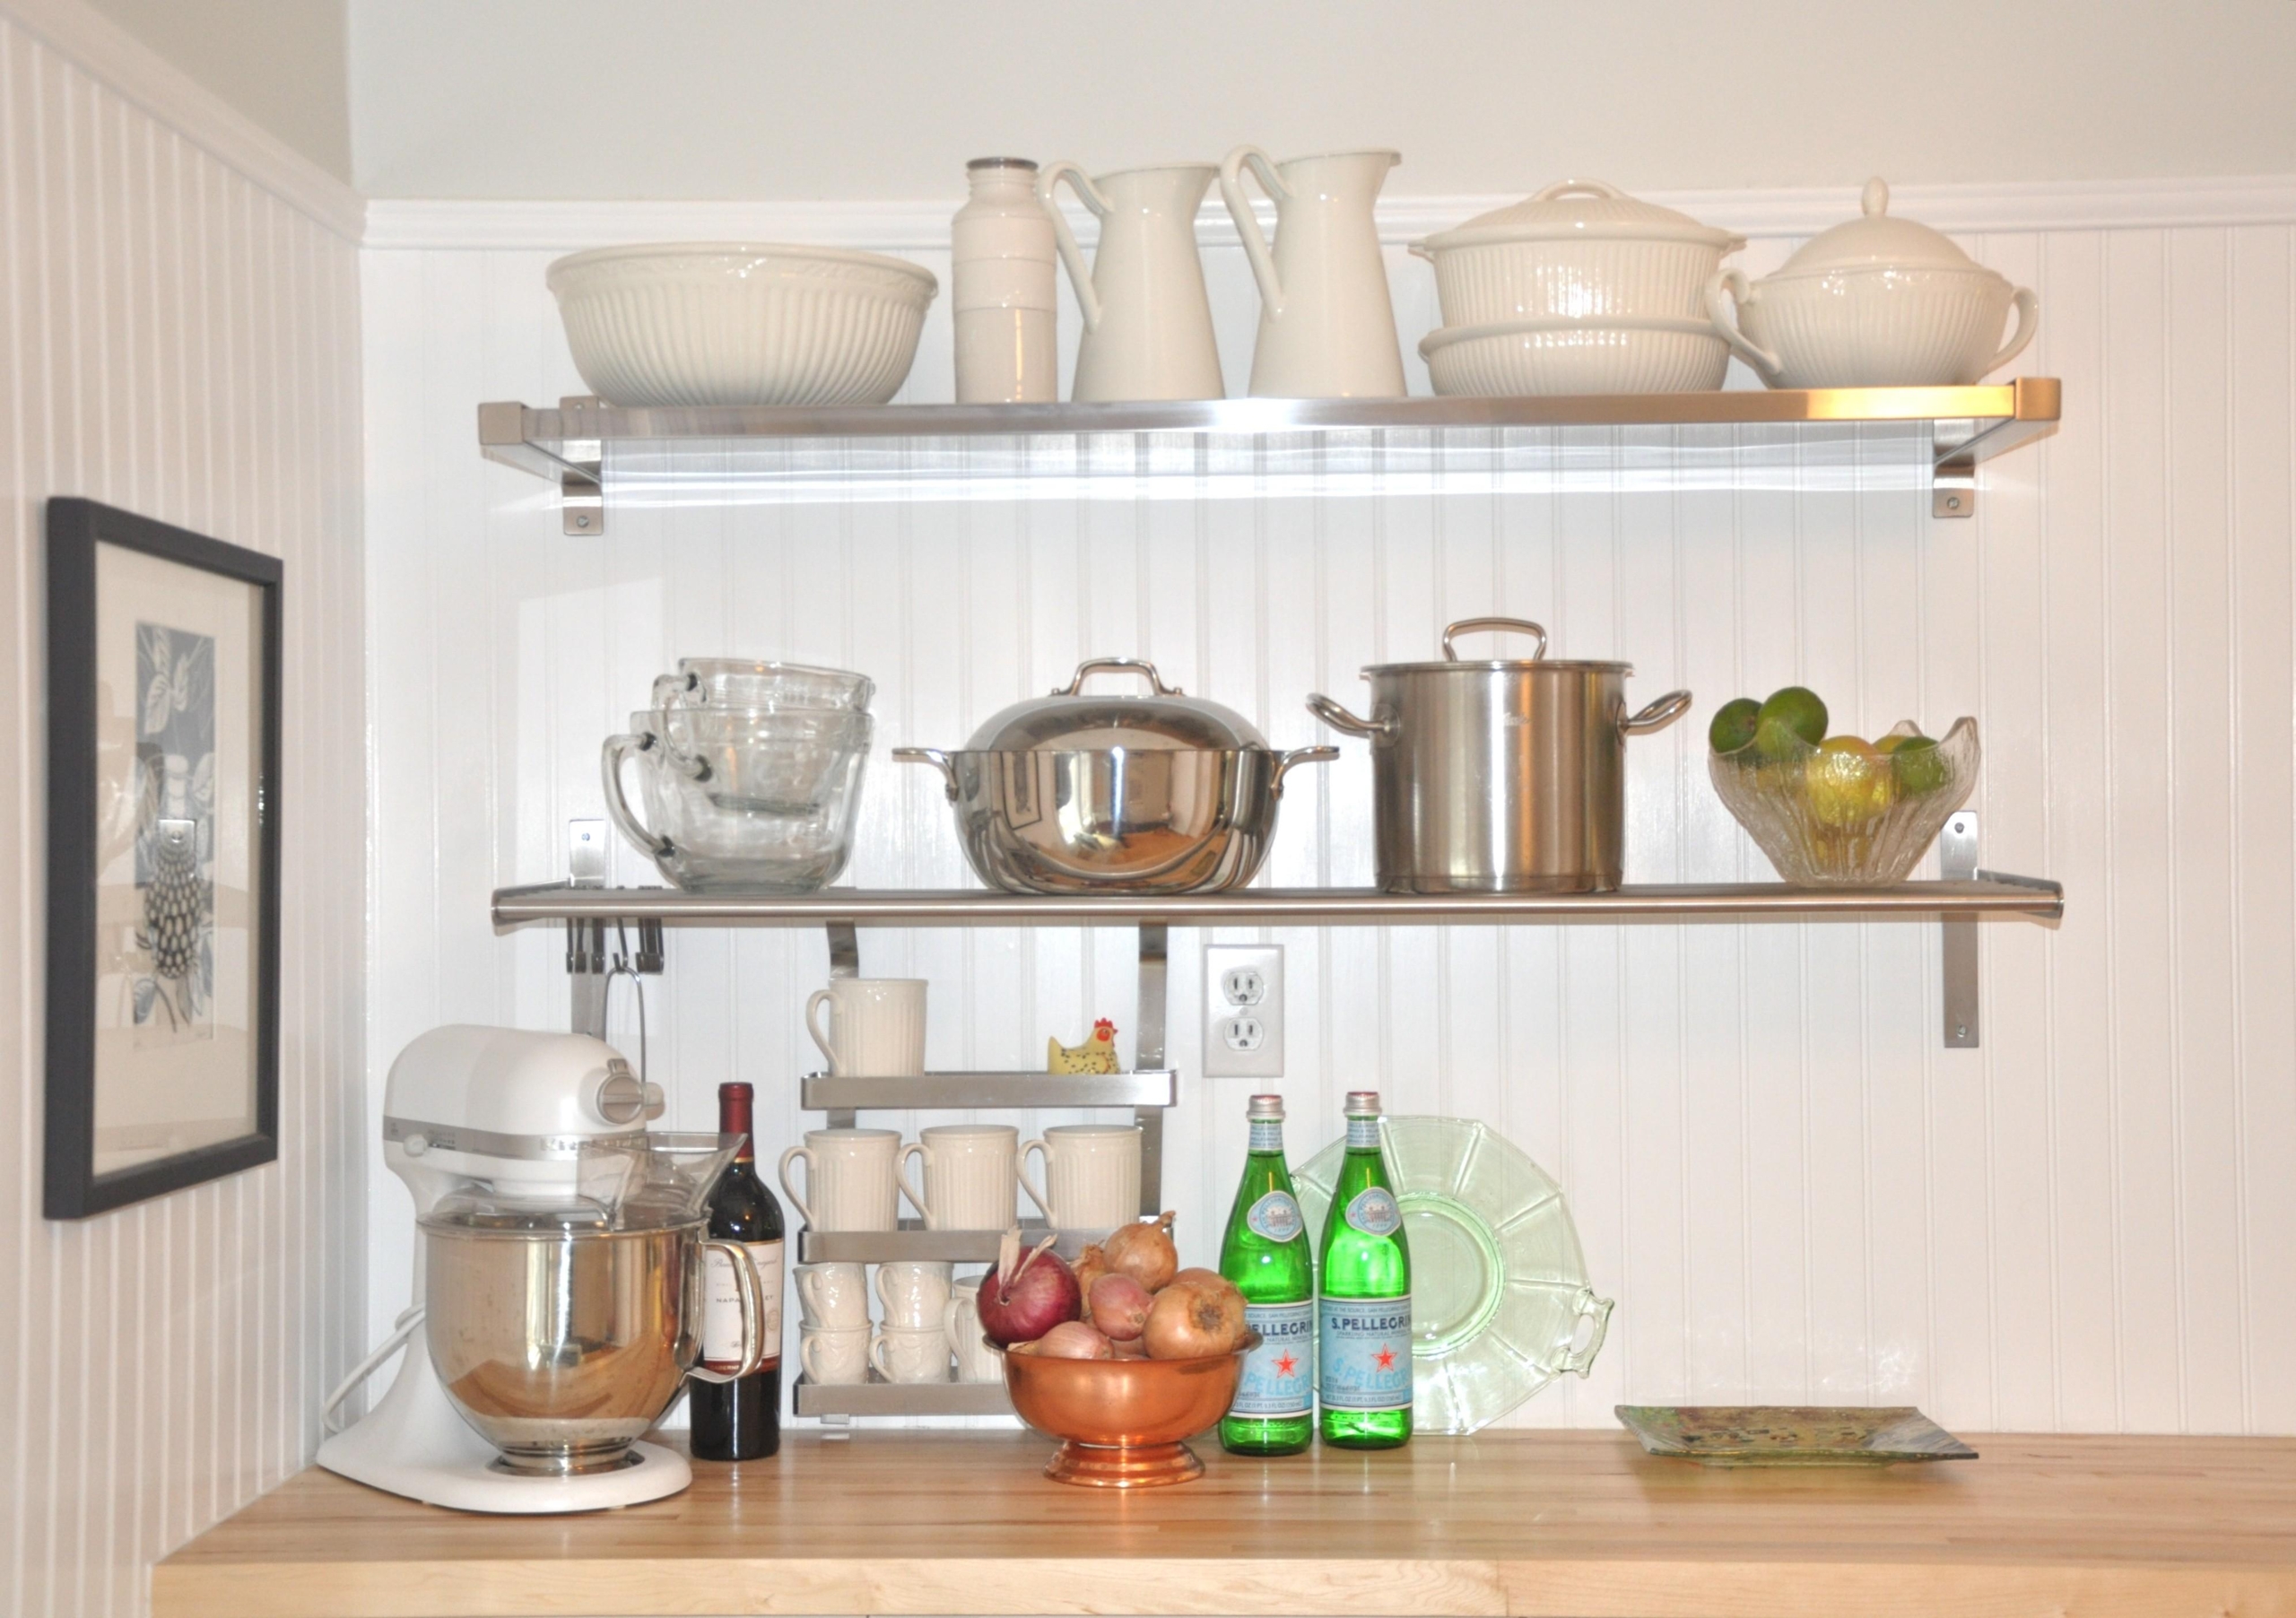 https://visualhunt.com/photos/12/stainless-steel-kitchen-wall-shelves-ikea-stainless-steel.jpg